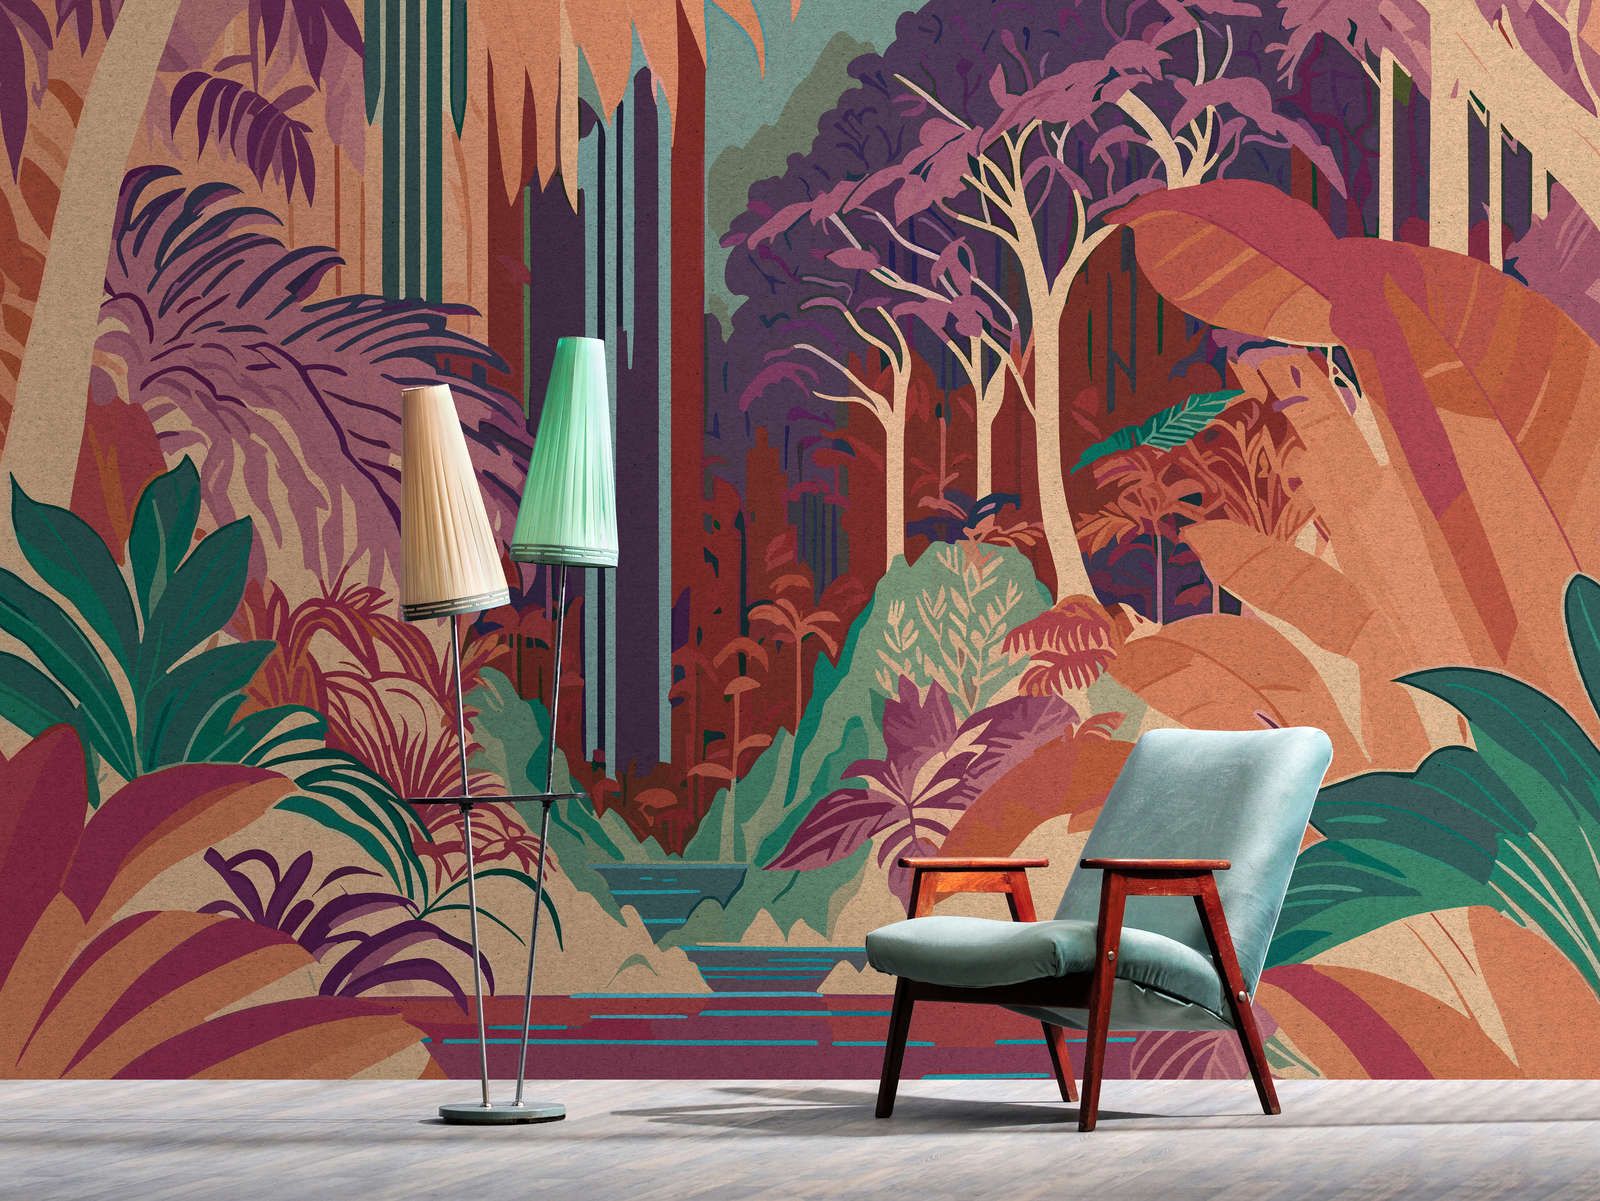             Photo wallpaper »rhea« - Abstract jungle motif with kraft paper texture - Smooth, slightly shiny premium non-woven fabric
        